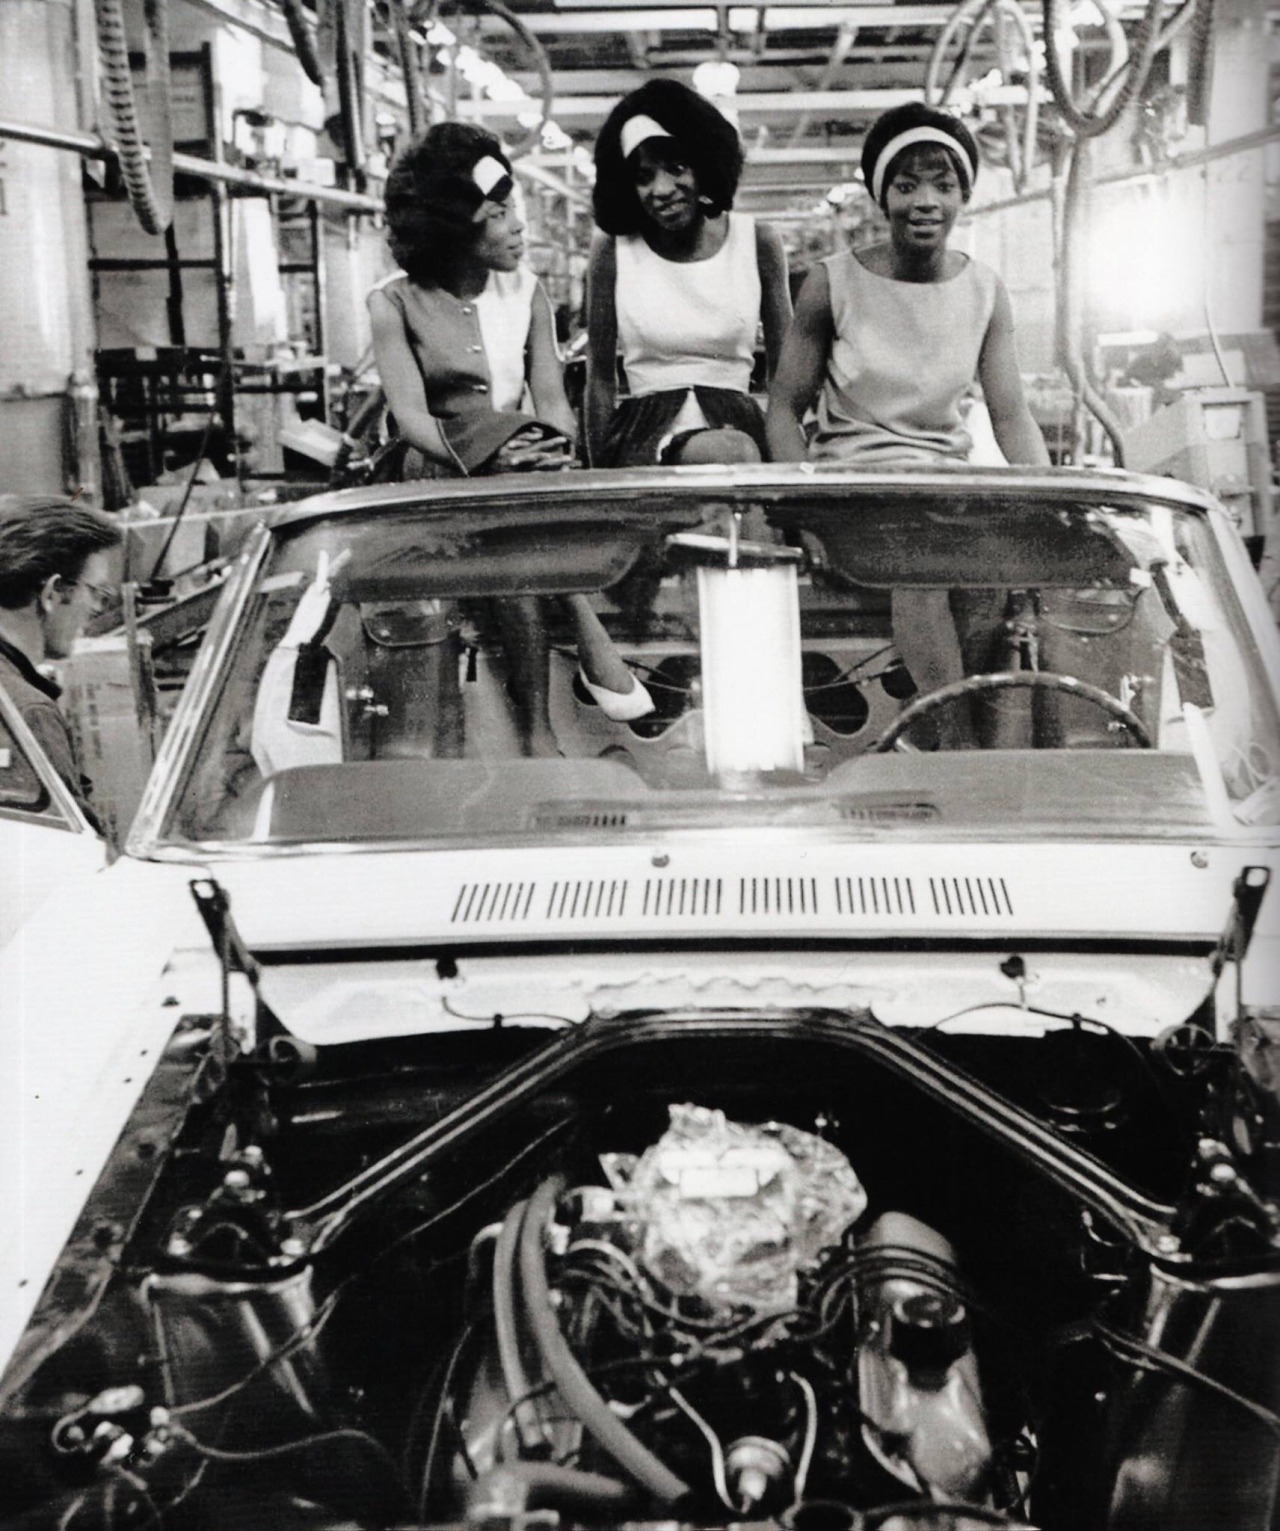 isabelcostasixties: Martha and the Vandellas at the Mustang assembly line at the